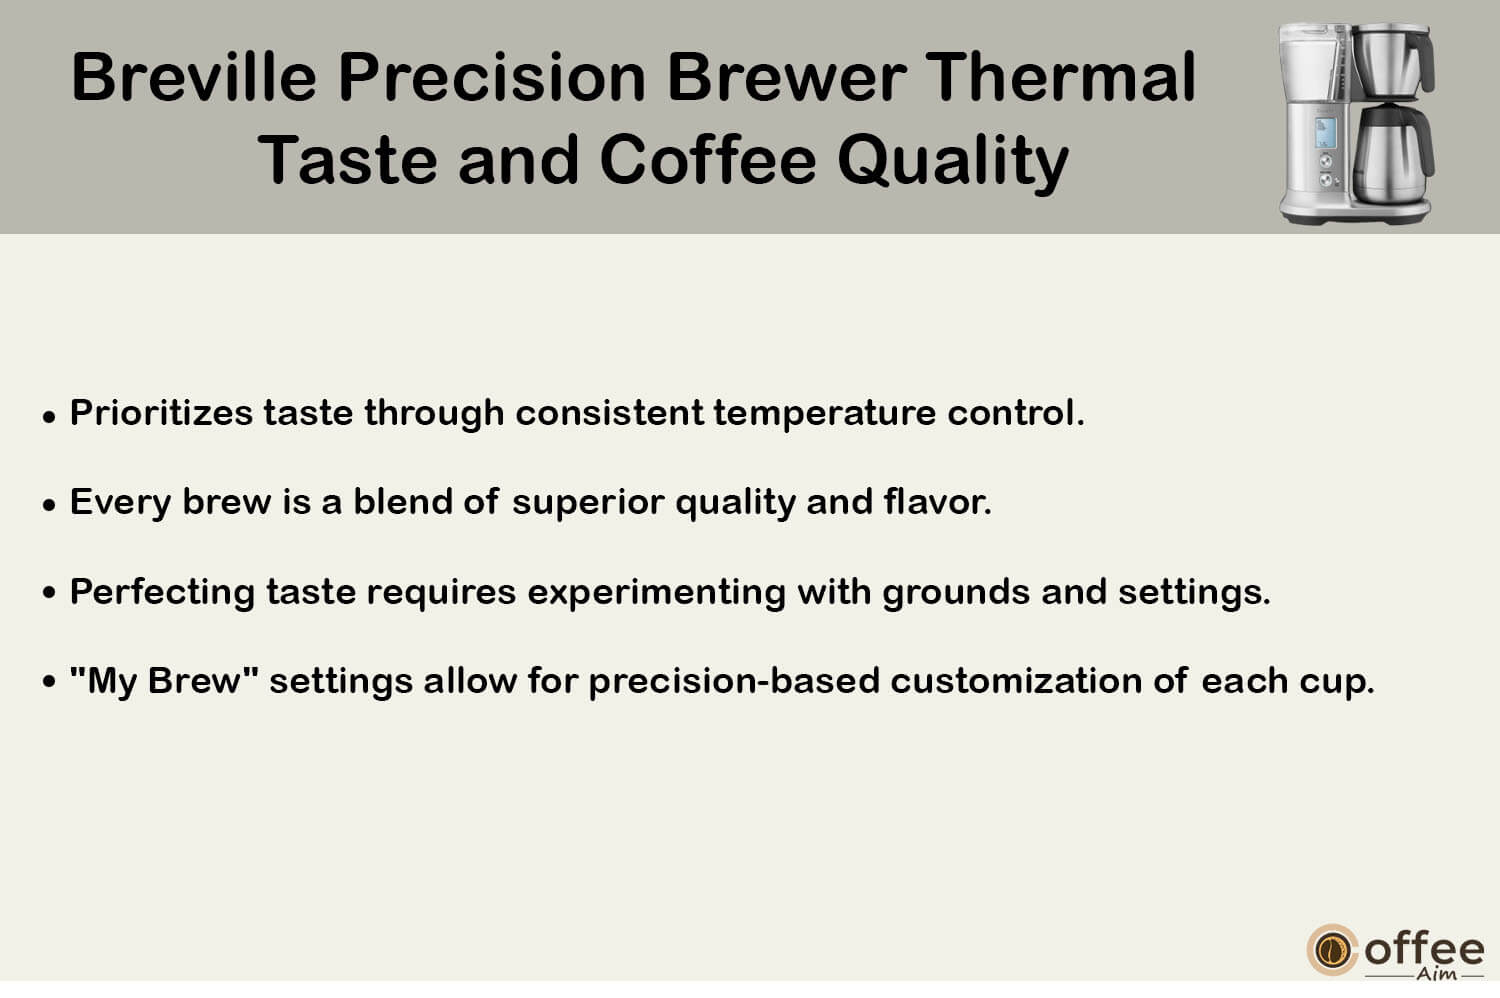 This image intricately delineates the nuanced flavors and exceptional coffee quality embodied by the Breville Precision Brewer Thermal, perfectly complementing the comprehensive assessment presented in the article titled "Breville Precision Brewer Thermal Review."